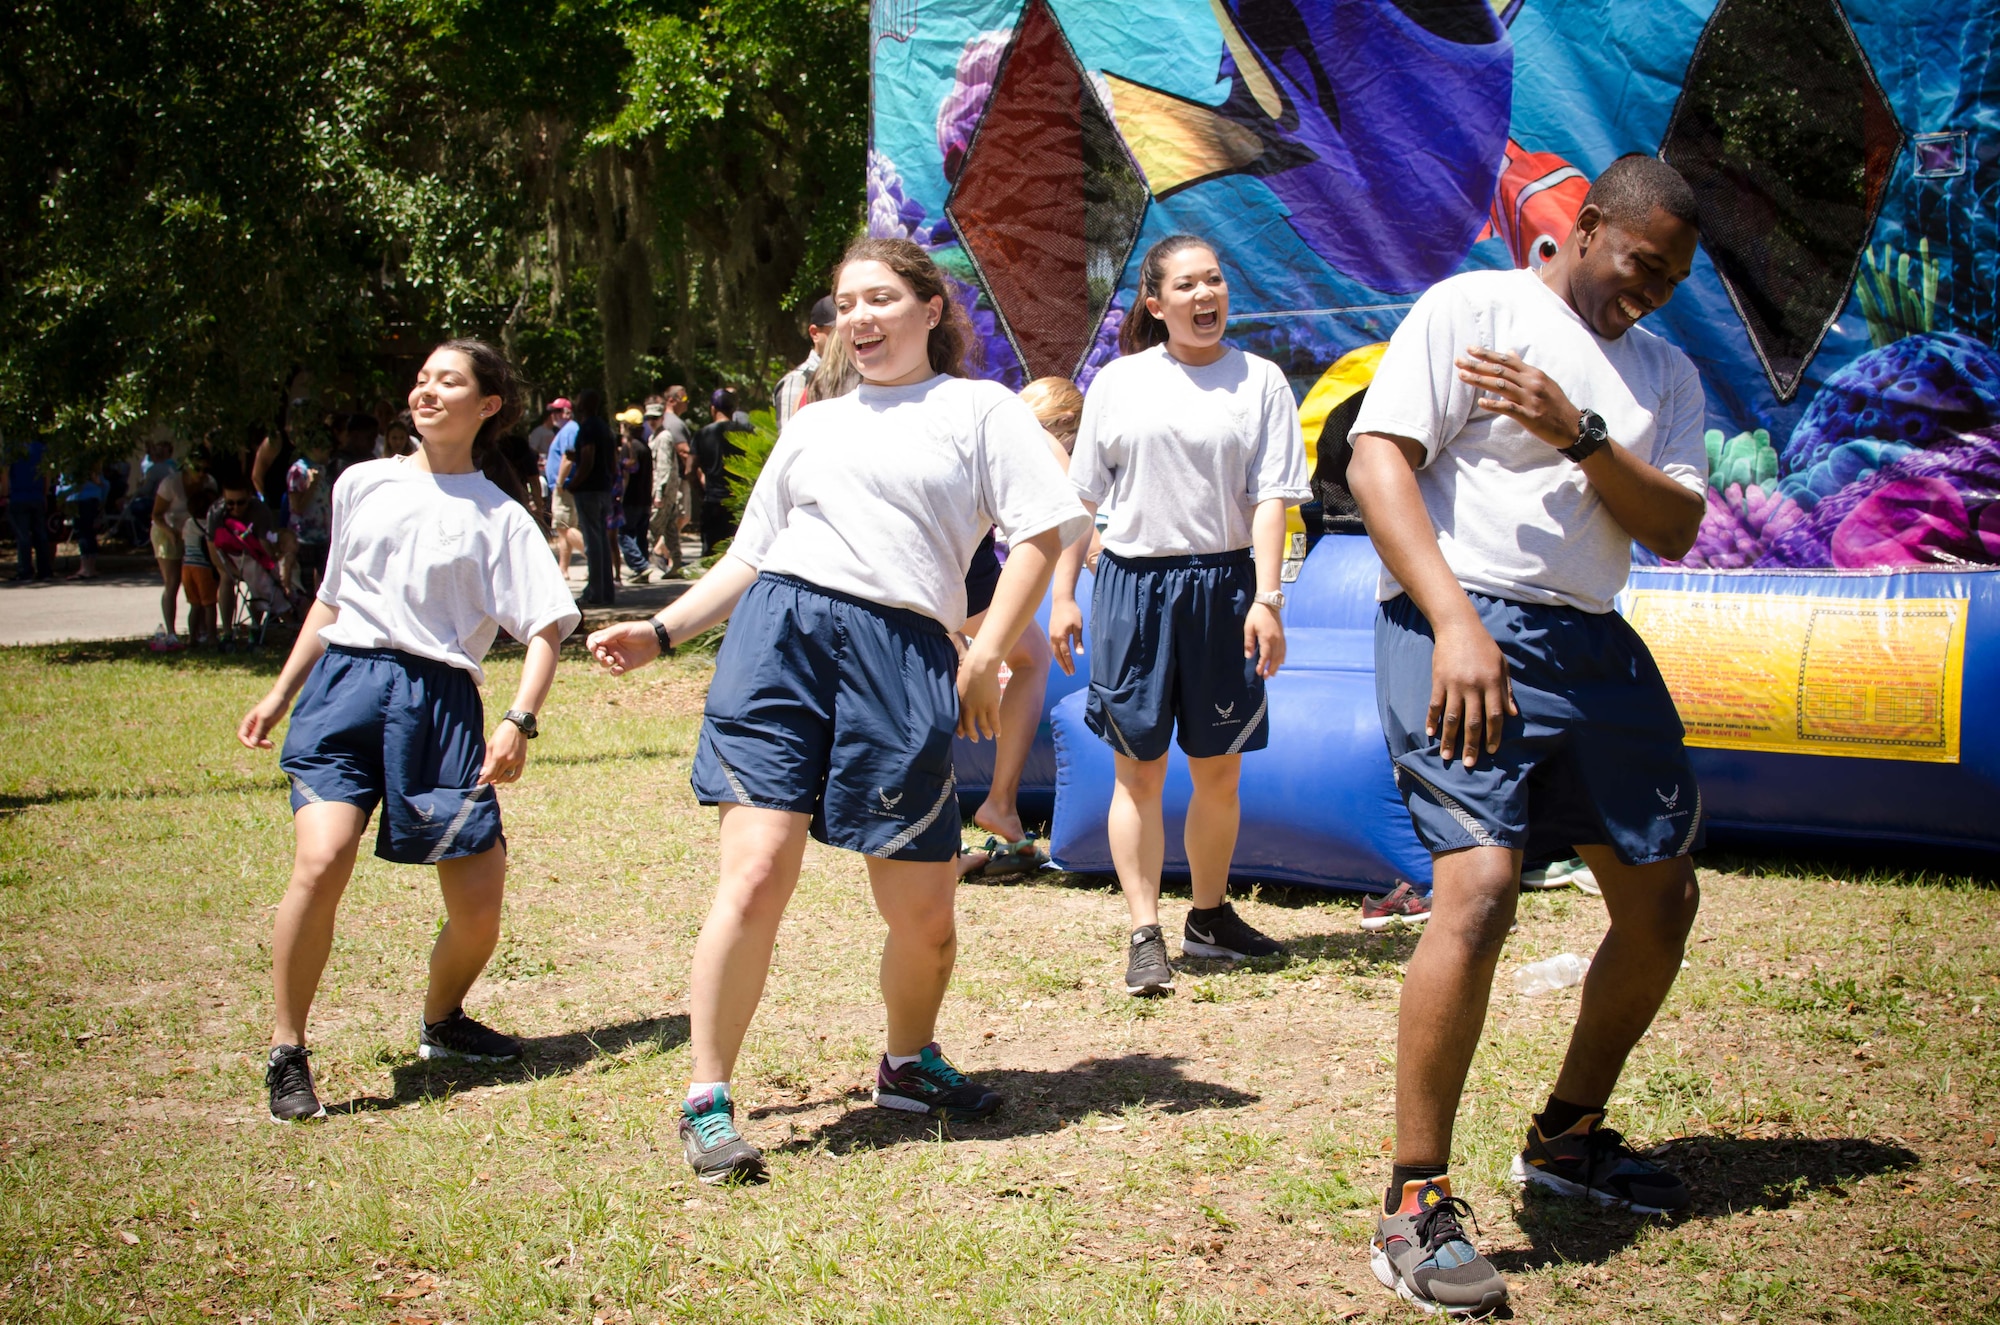 Airmen assigned to the 81st Training Wing dance while volunteering at the 403rd Wing Airman and Family Day picnic May 6, 2017 at Keesler Air Force Base, Mississippi. (U.S. Air Force photo/Staff Sgt. Heather Heiney)